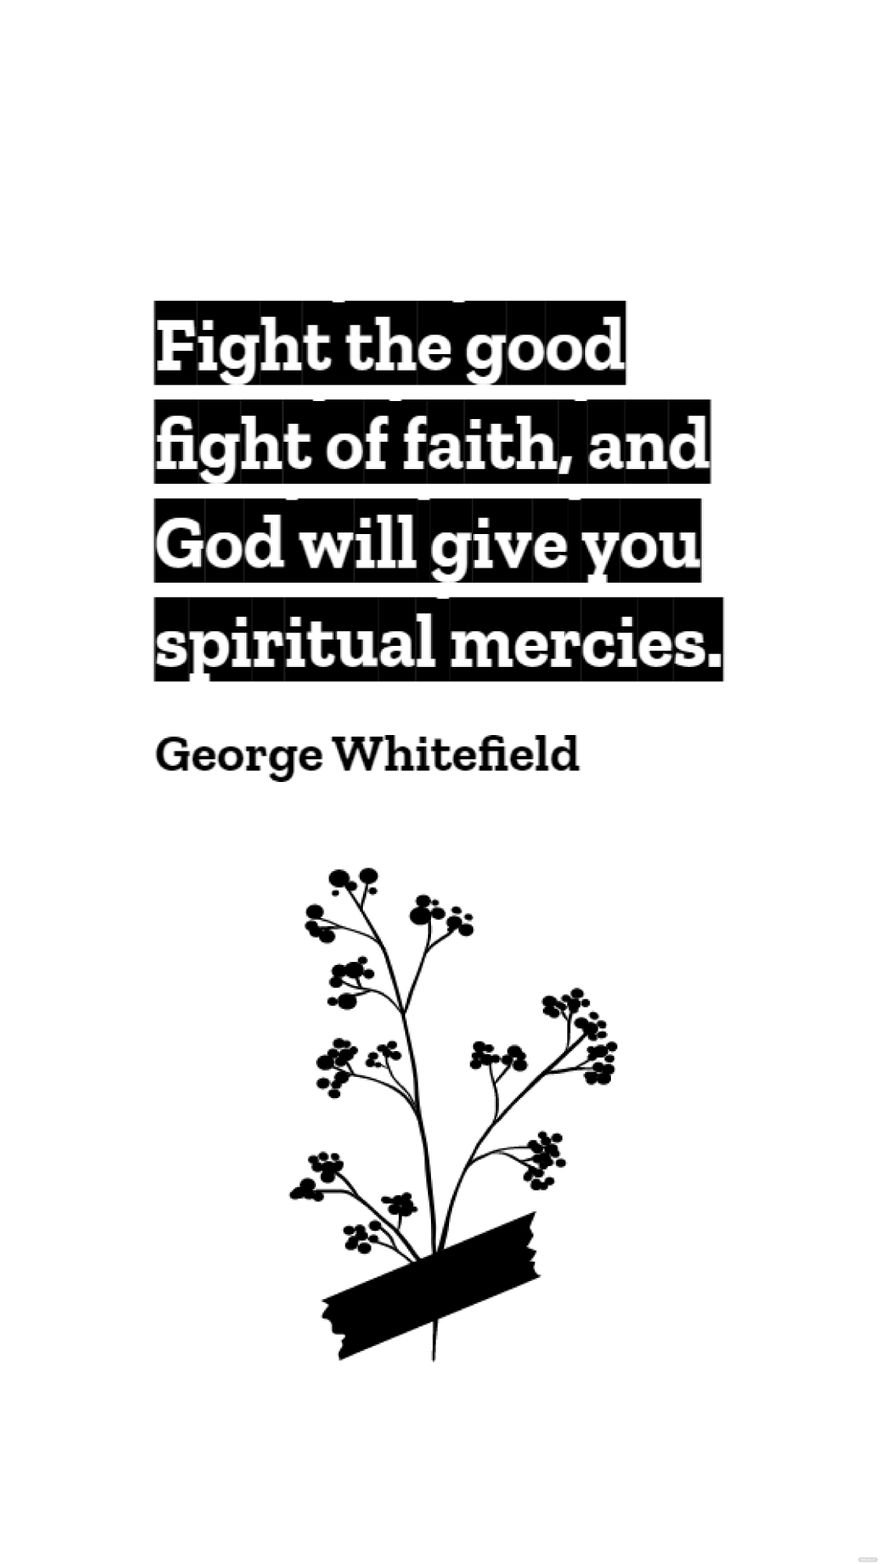 Free George Whitefield - Fight the good fight of faith, and God will give you spiritual mercies. in JPG